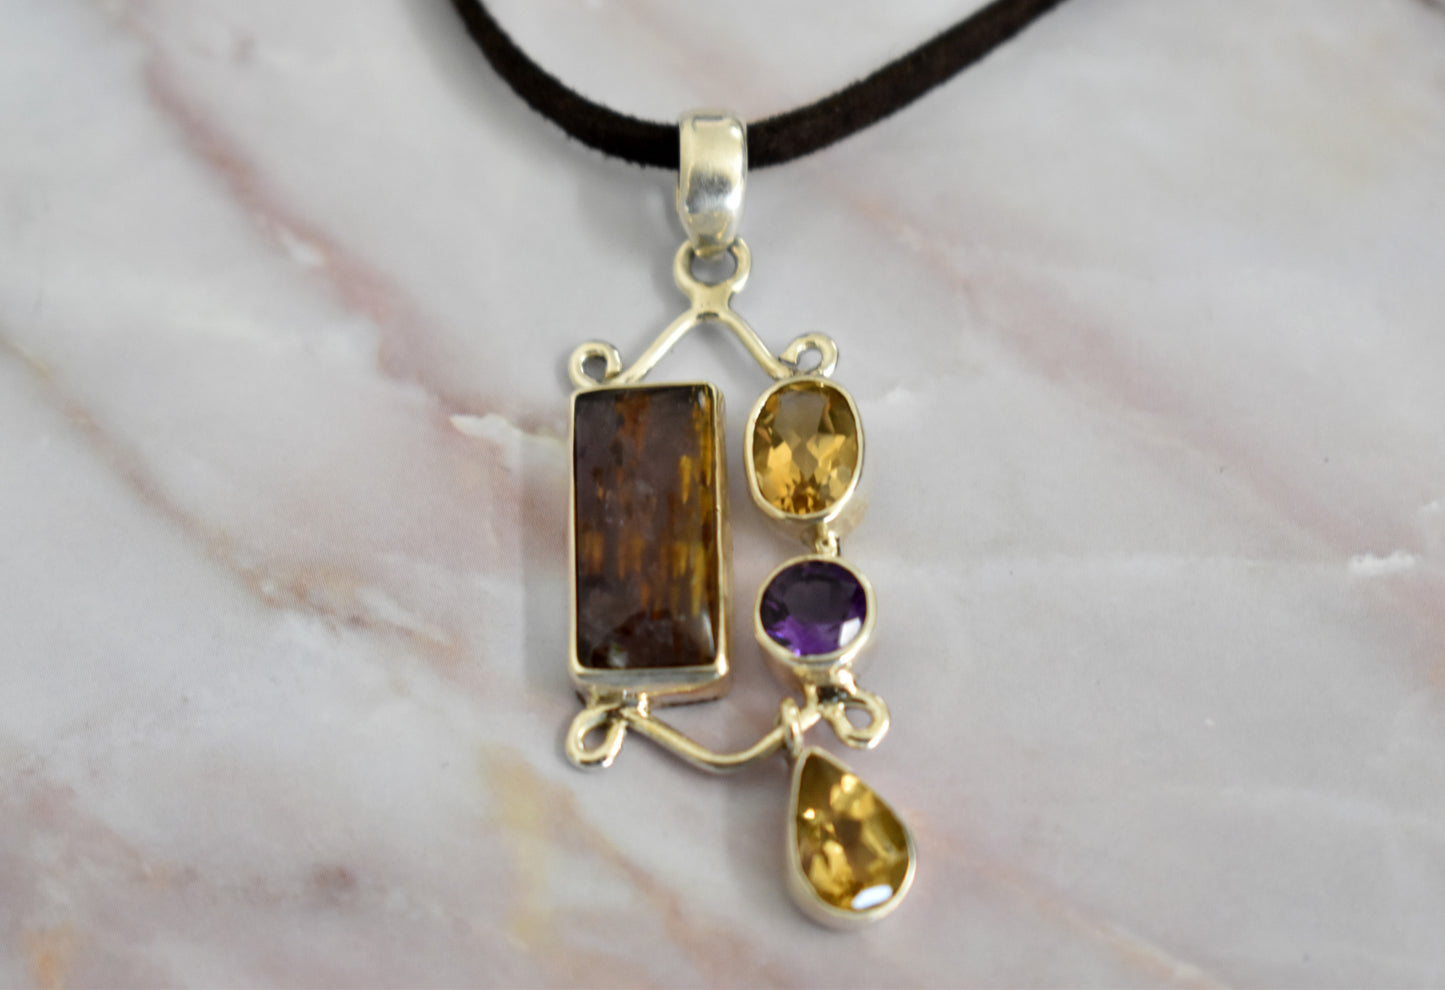 stones-of-transformation - Citrine, Amethyst and Super 7 (Melody's Stone) Necklace - Stones of Transformation - 